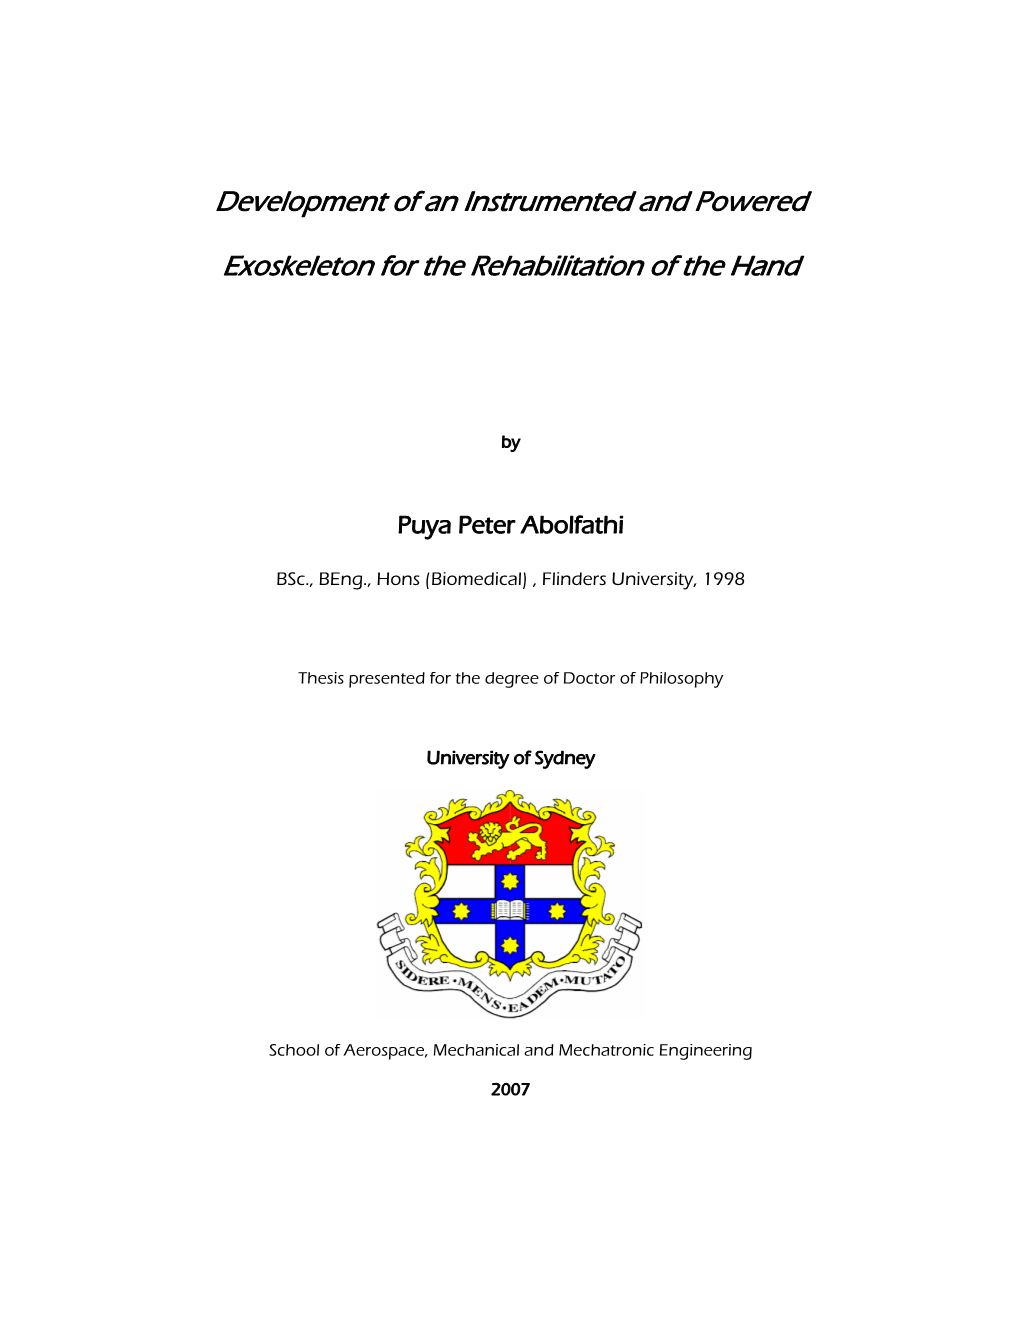 Development of an Instrumented and Powered Exoskeleton for The